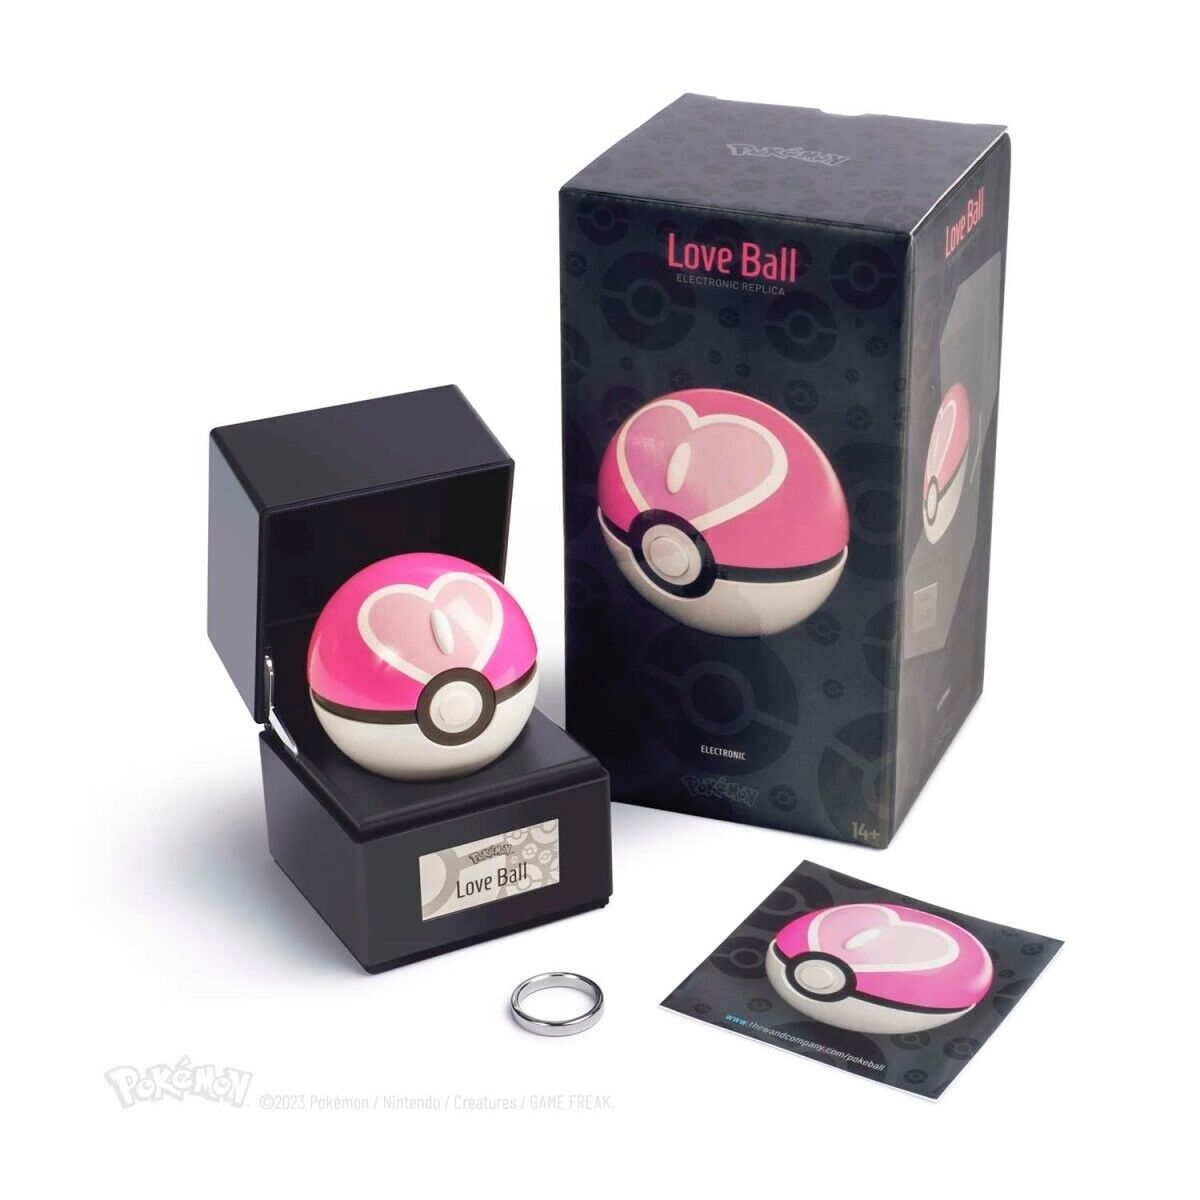 Pokemon Love Ball The Wand Company Officially Licensed Pink Pokeball - New